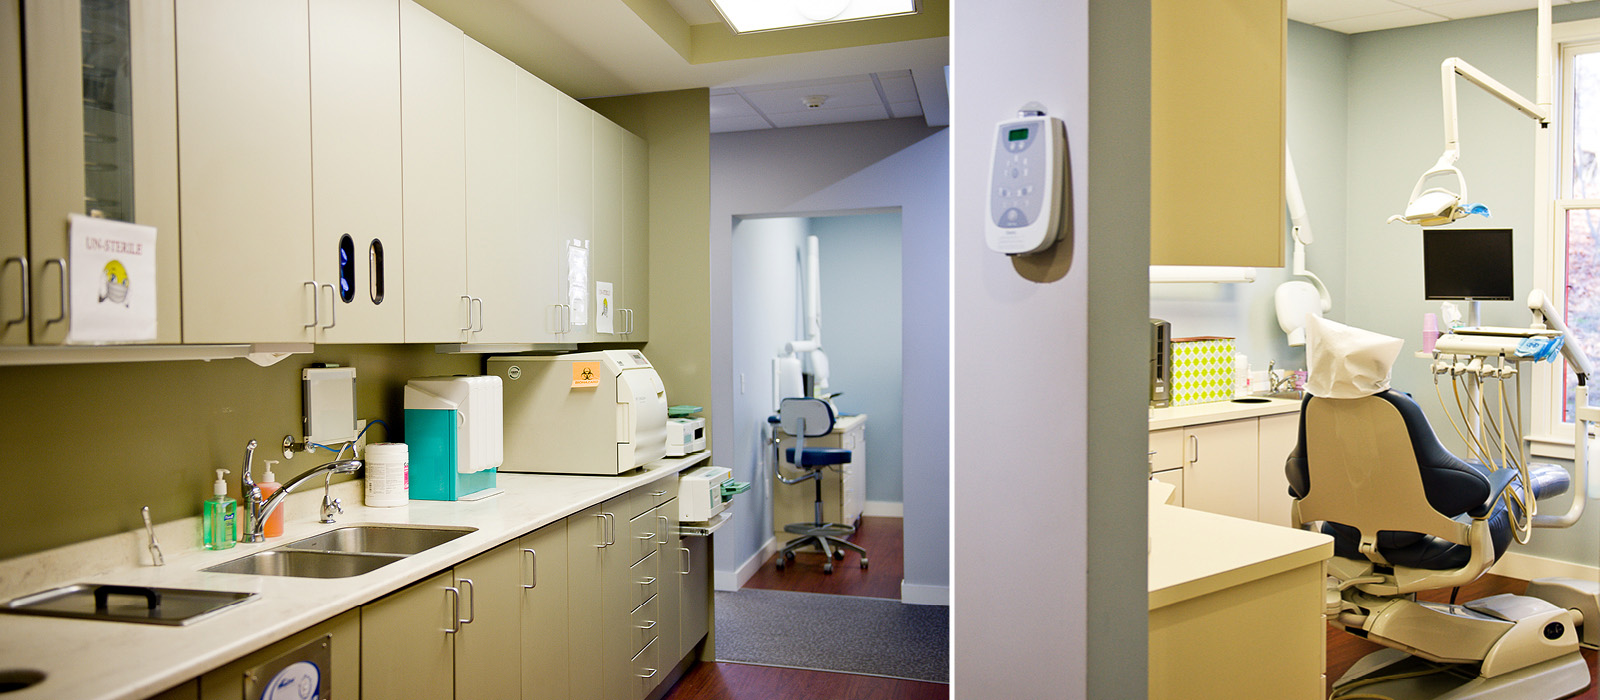 Paquette Family Dental clinical area and treatment room